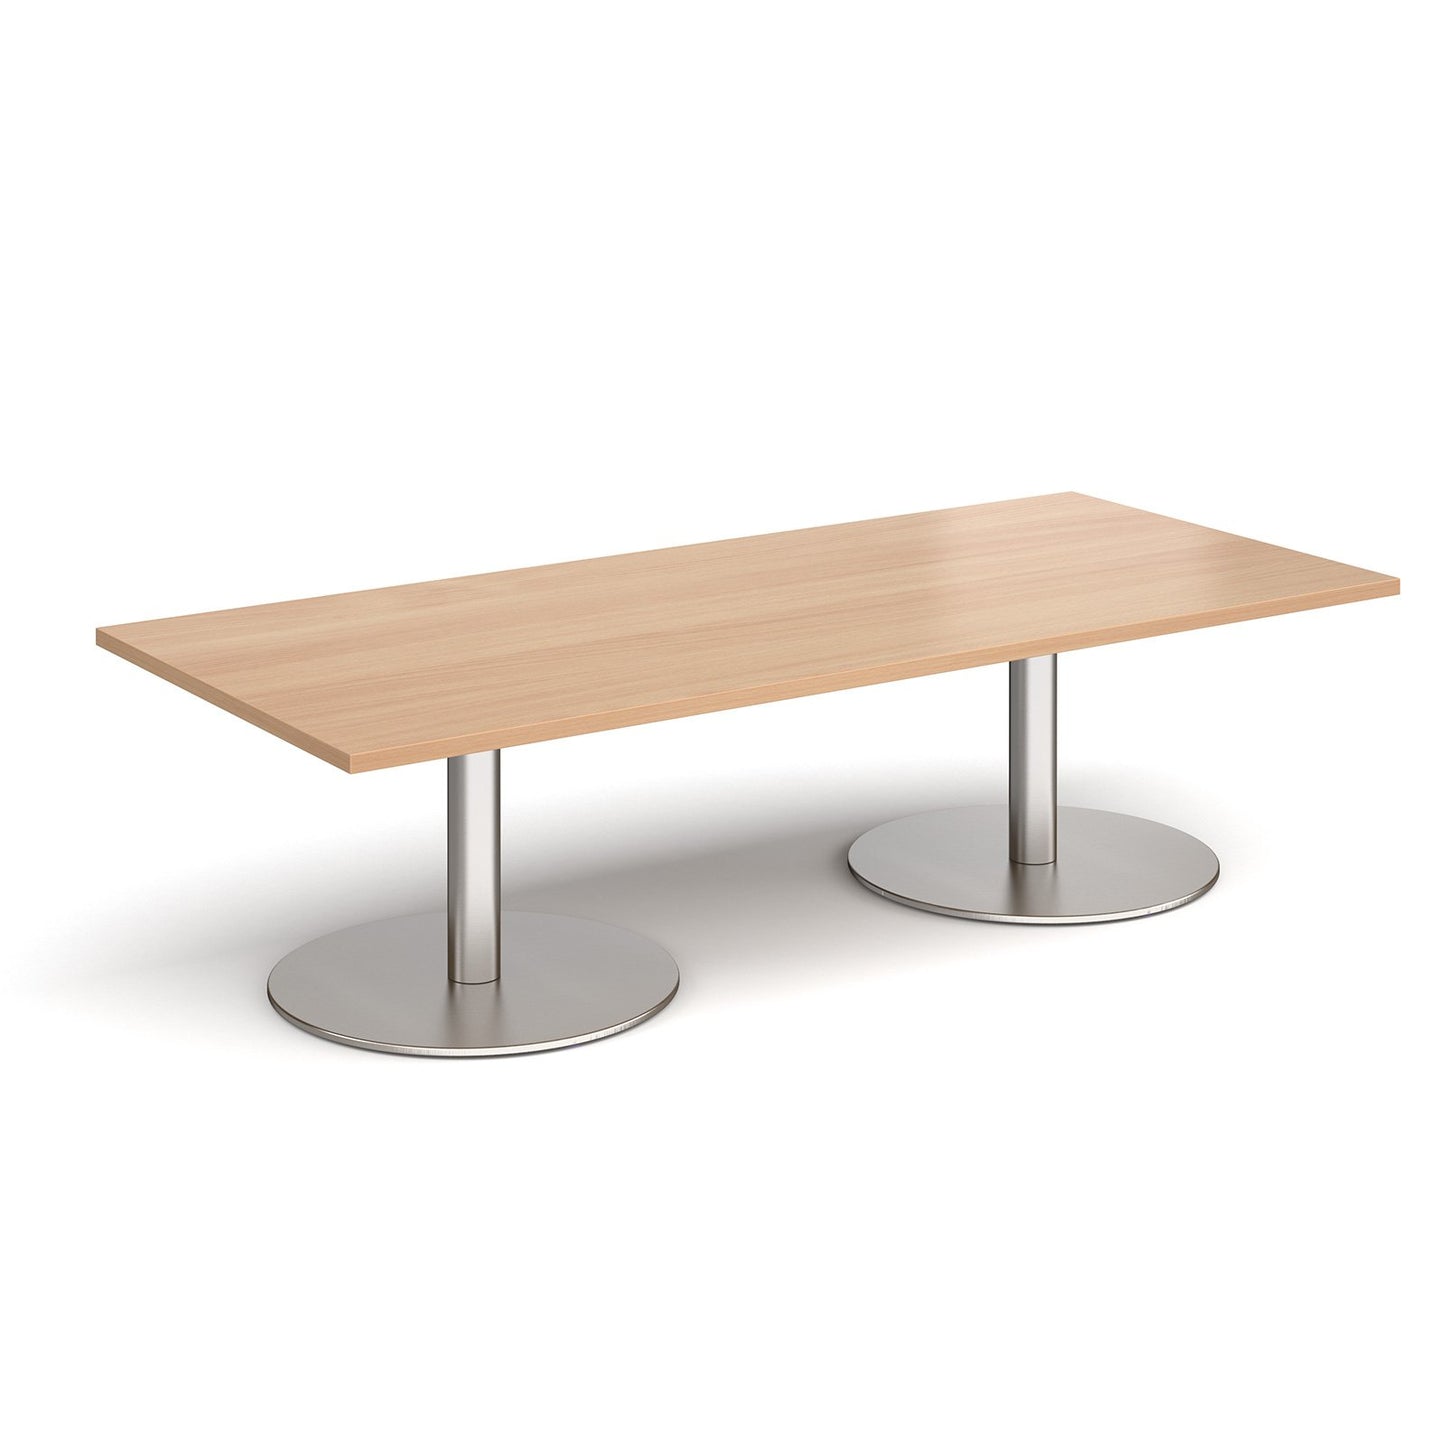 Monza rectangular coffee table with flat round bases